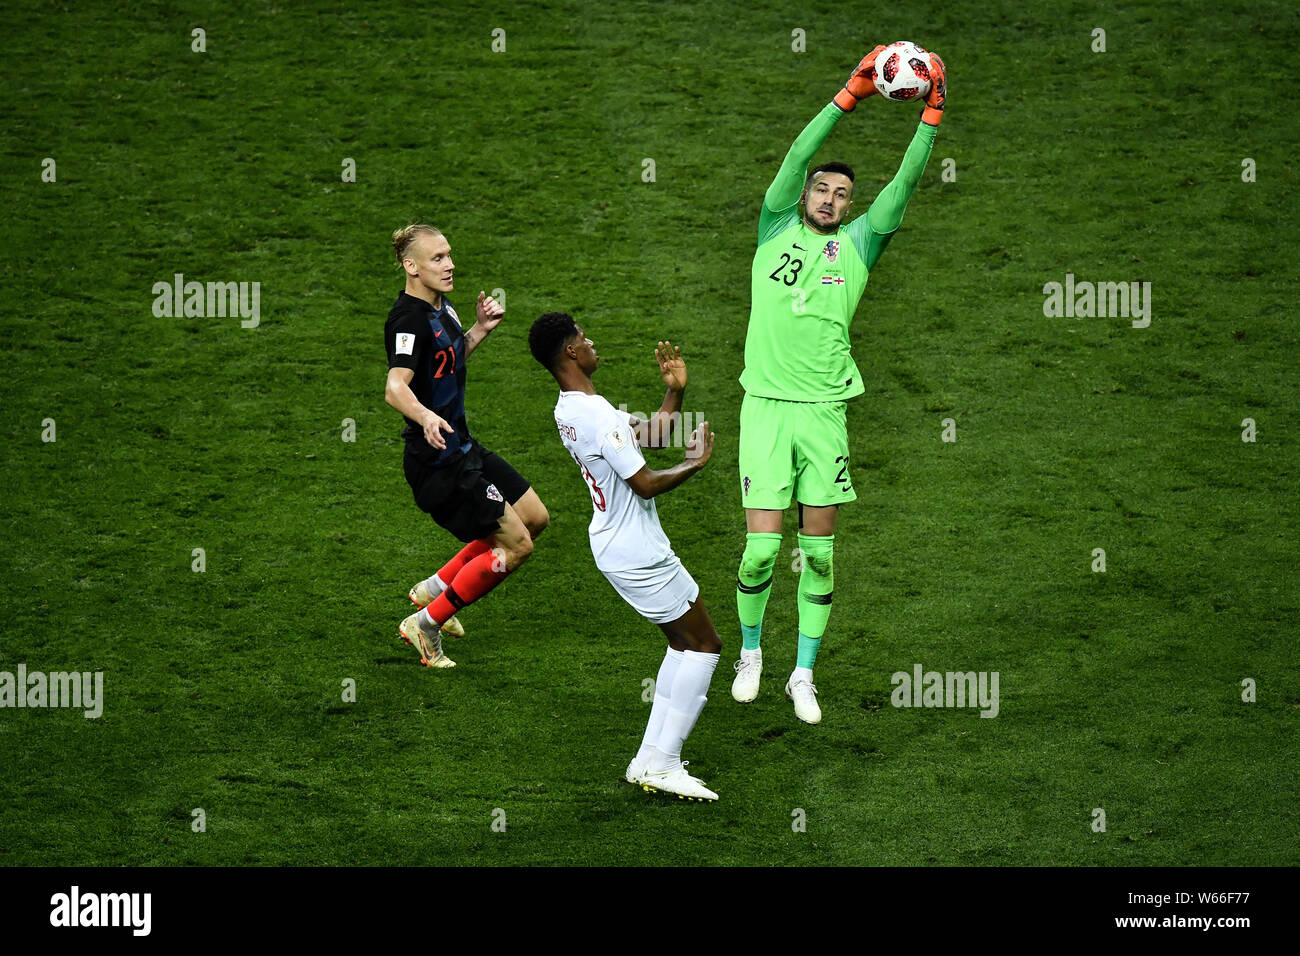 Goalkeeper Danijel Subasic of Croatia, right, saves the ball in front of Marcus Rashford of England in their semifinal match during the 2018 FIFA Worl Stock Photo